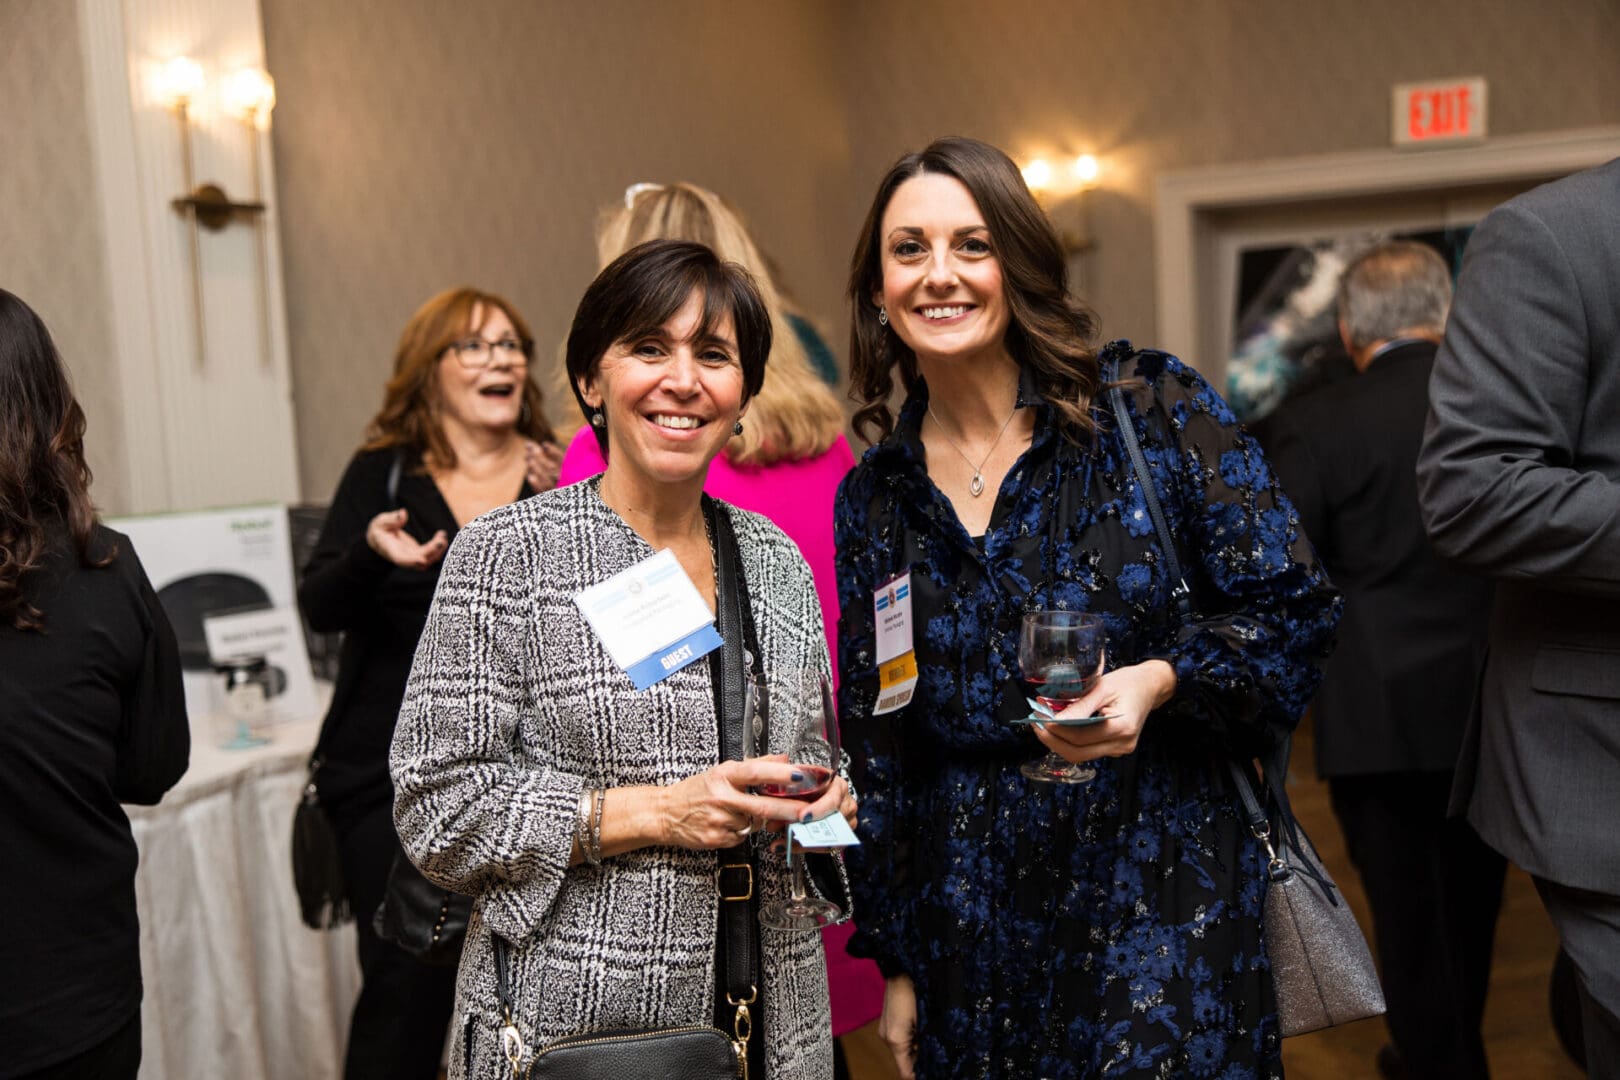 Two women smiling at a business event.